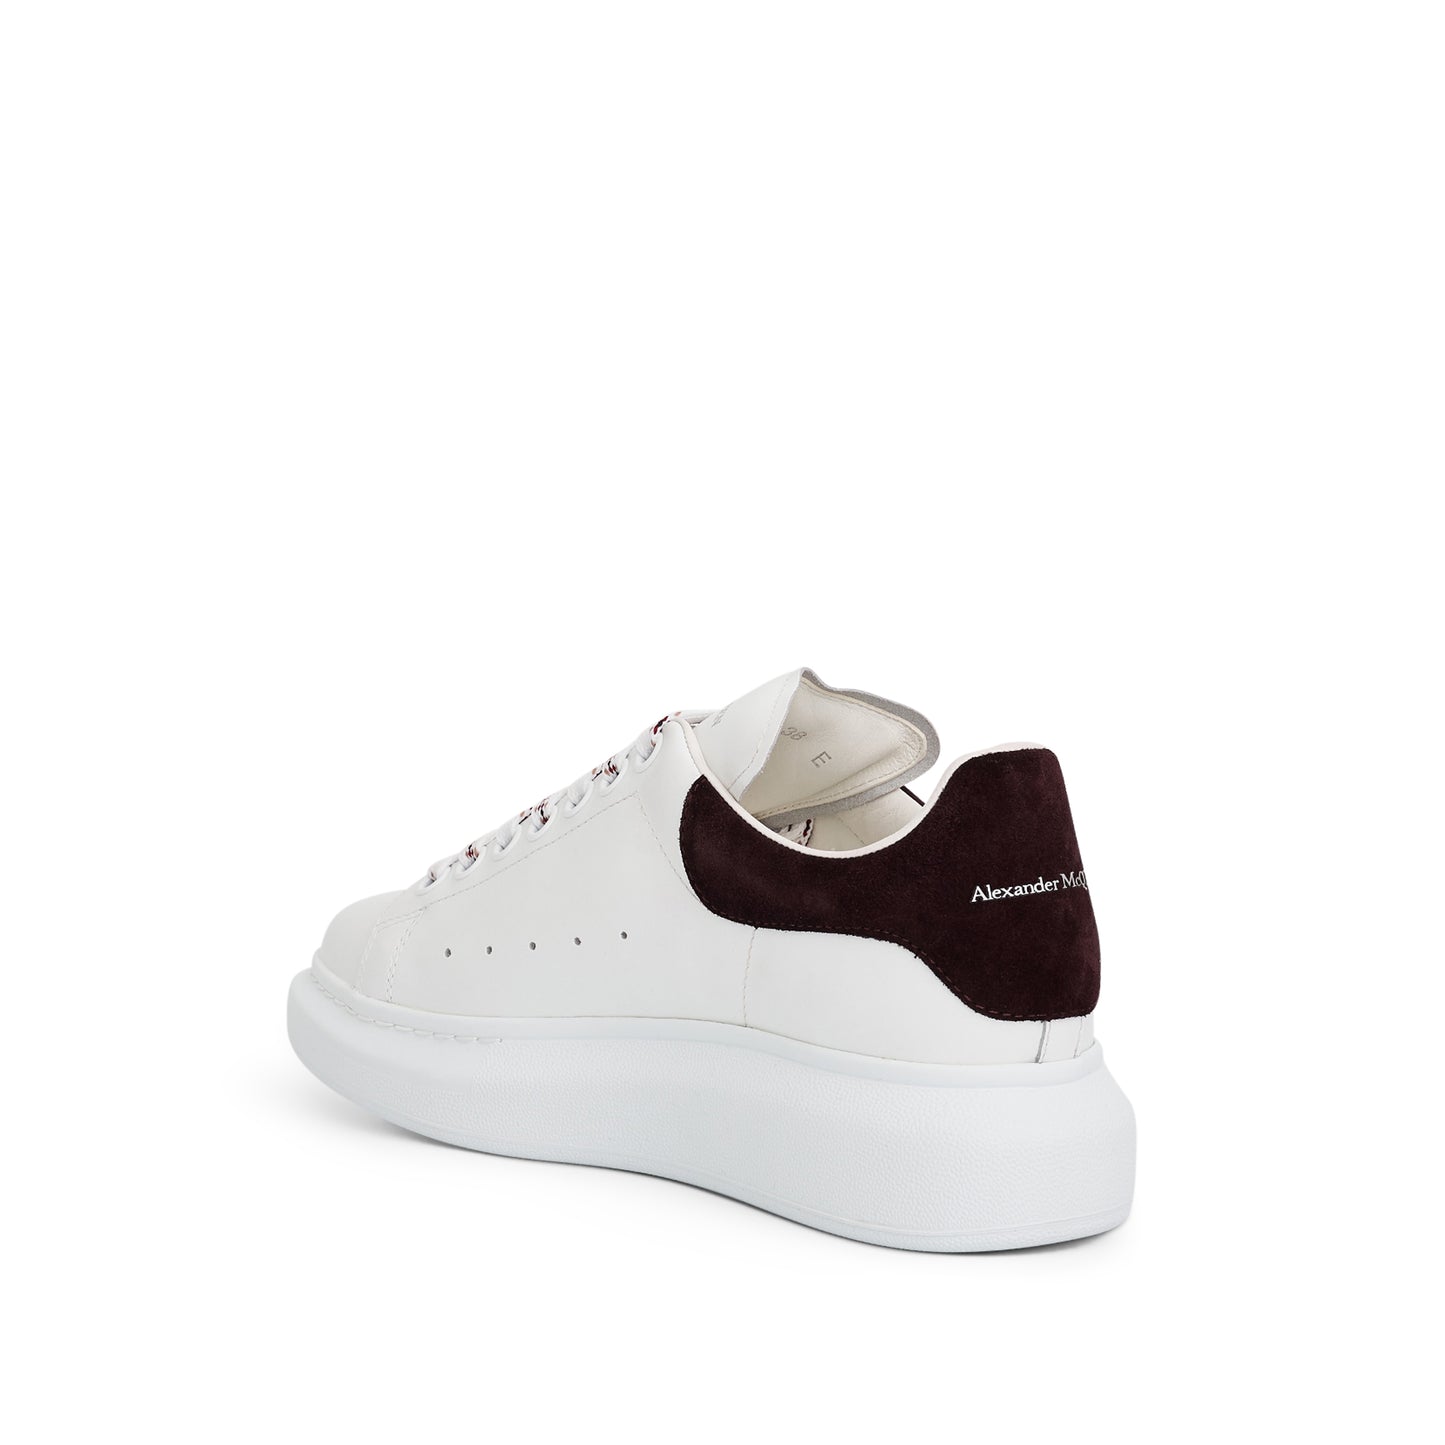 Larry Oversized New Suede Velour Sneaker in White